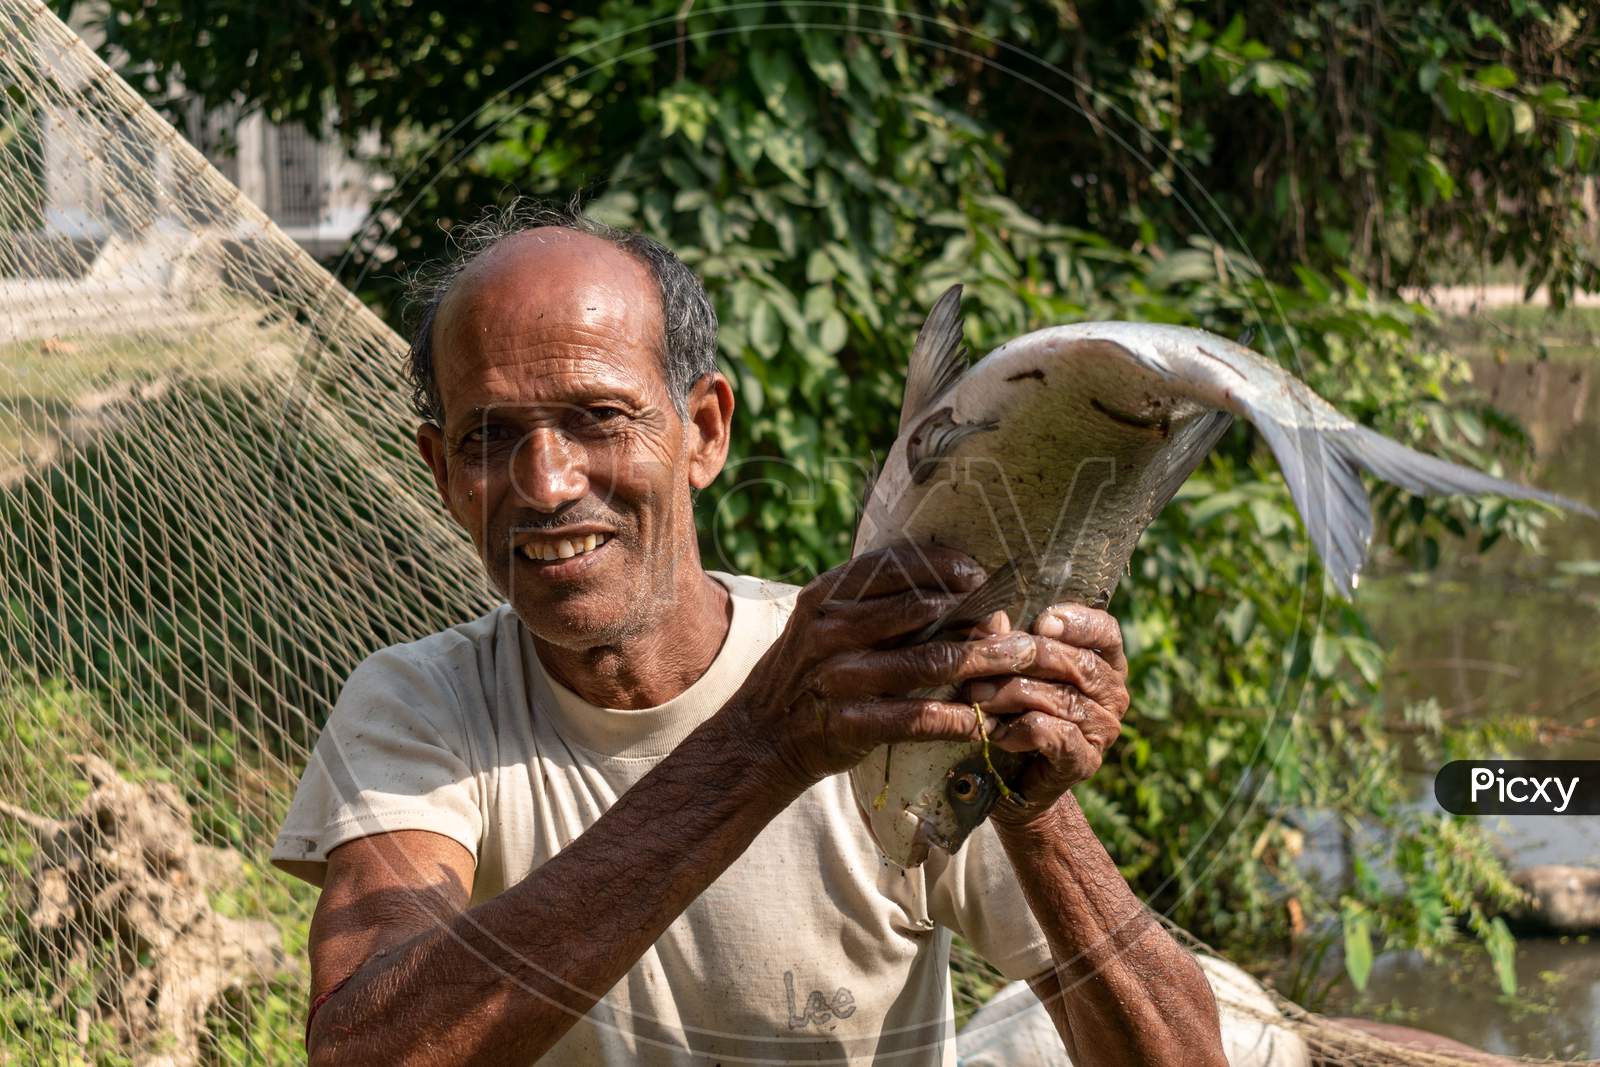 A poor fisherman in a village in West Bengal, India, is fishing with nets from the pond